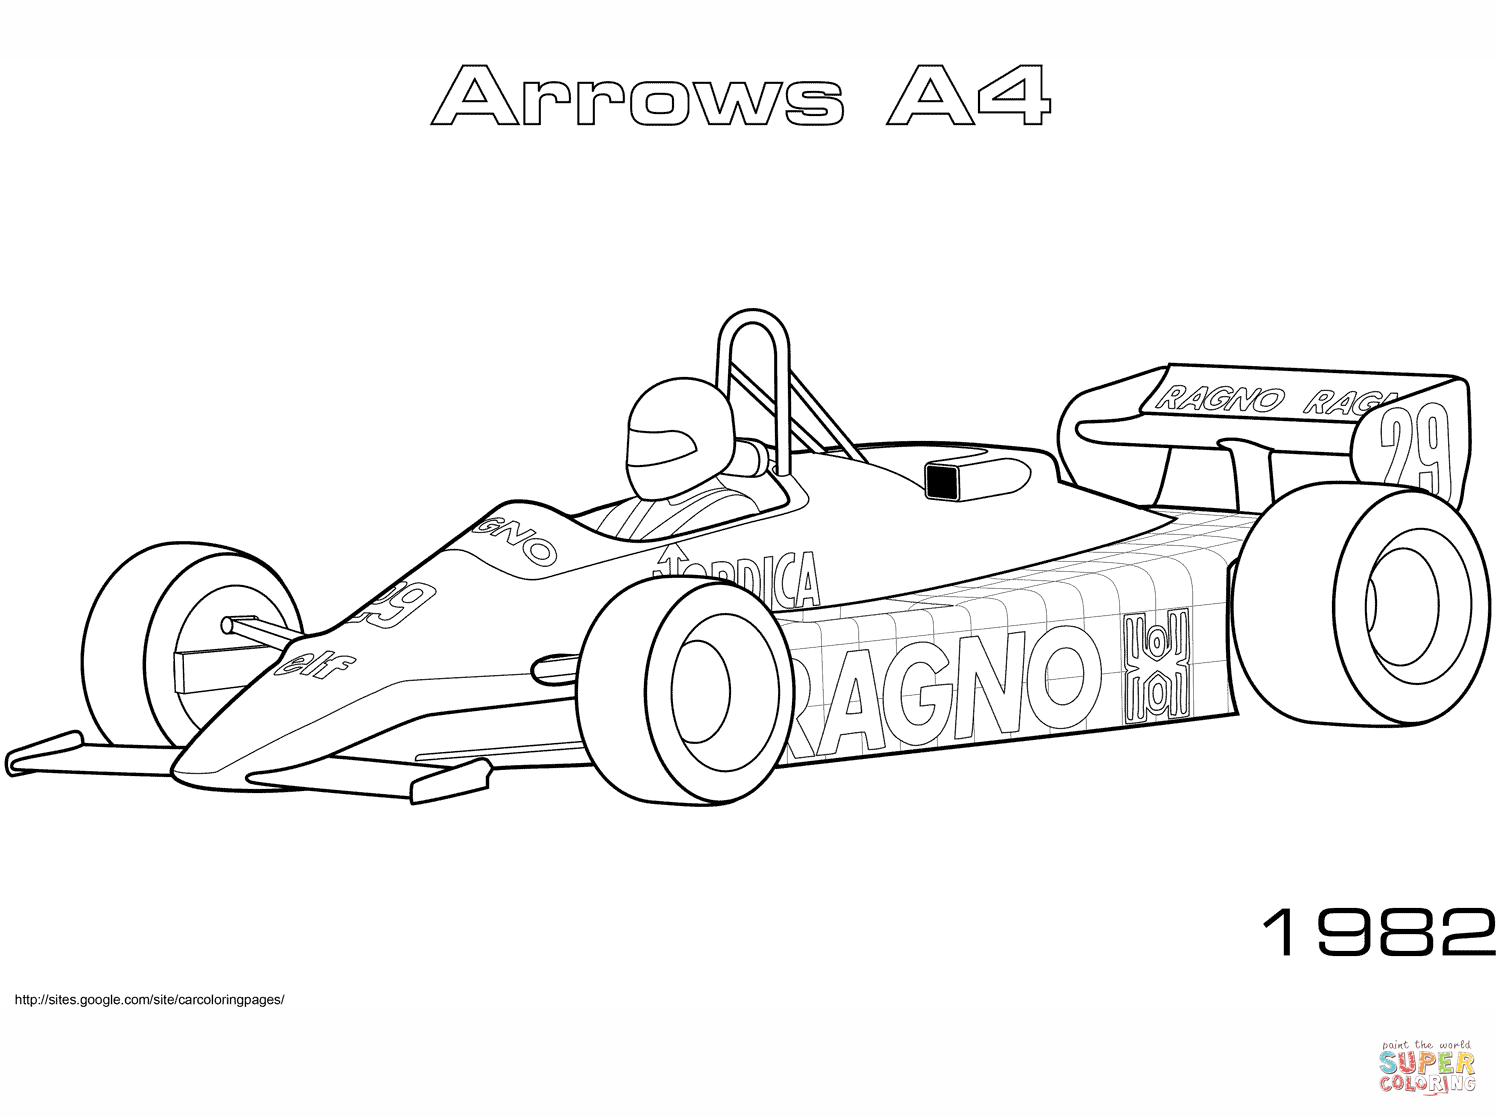 1982 Arrows A4 coloring page | Free Printable Coloring Pages